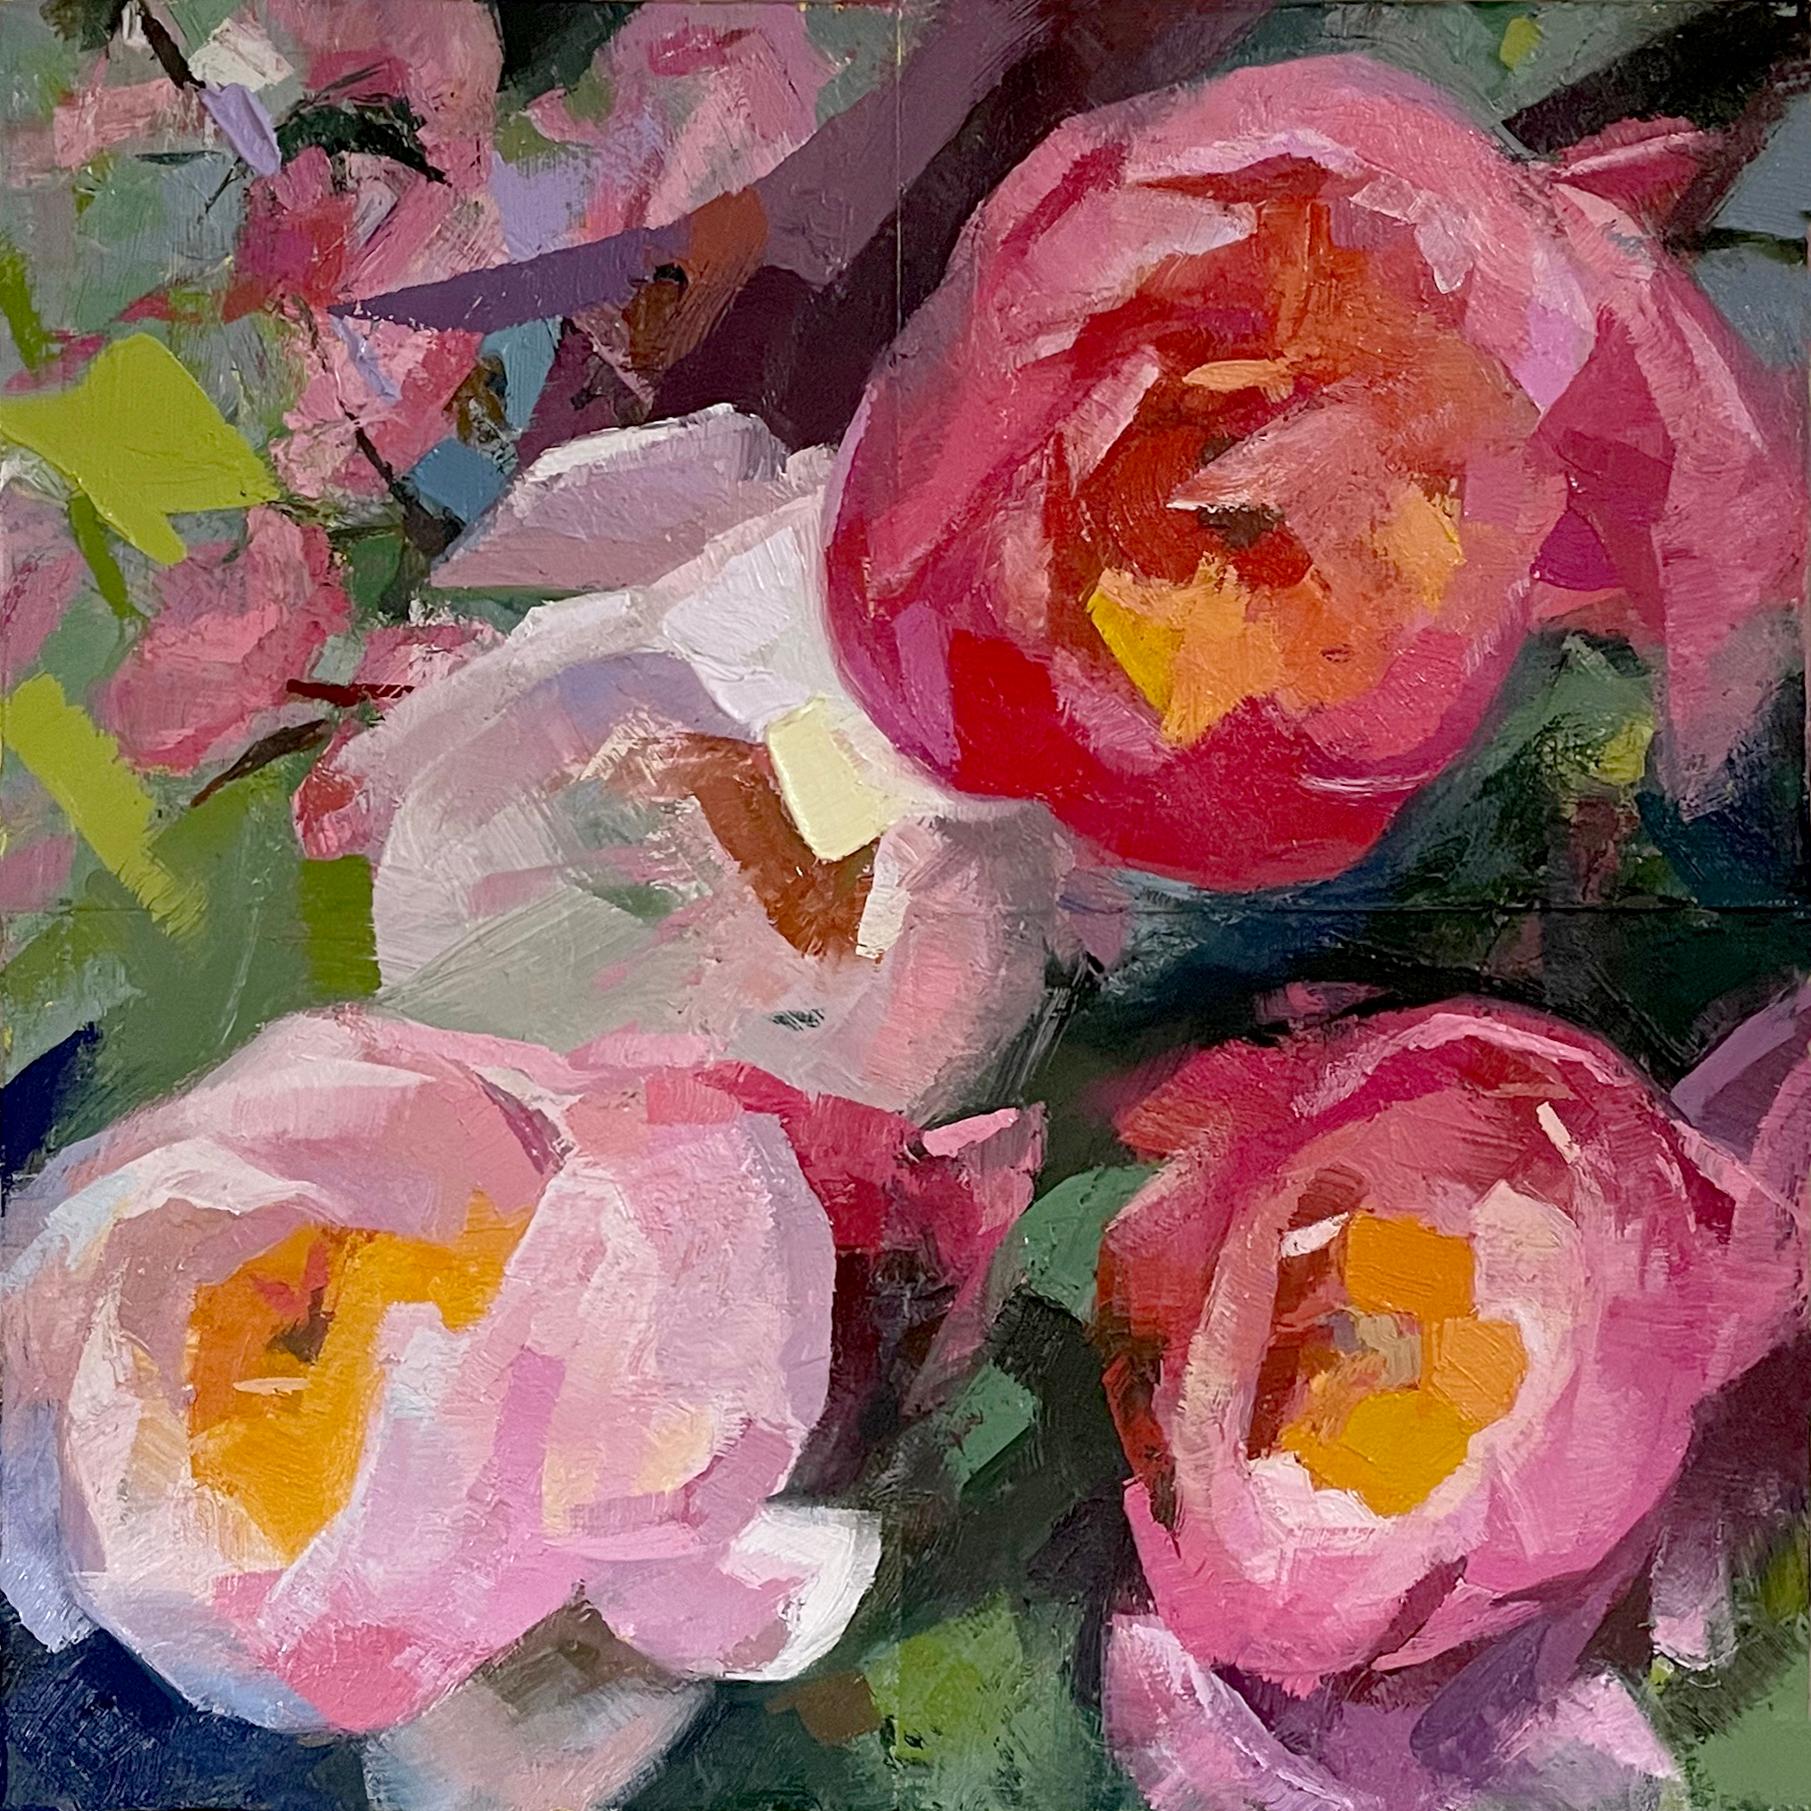 "Four Peonies", Oil painting